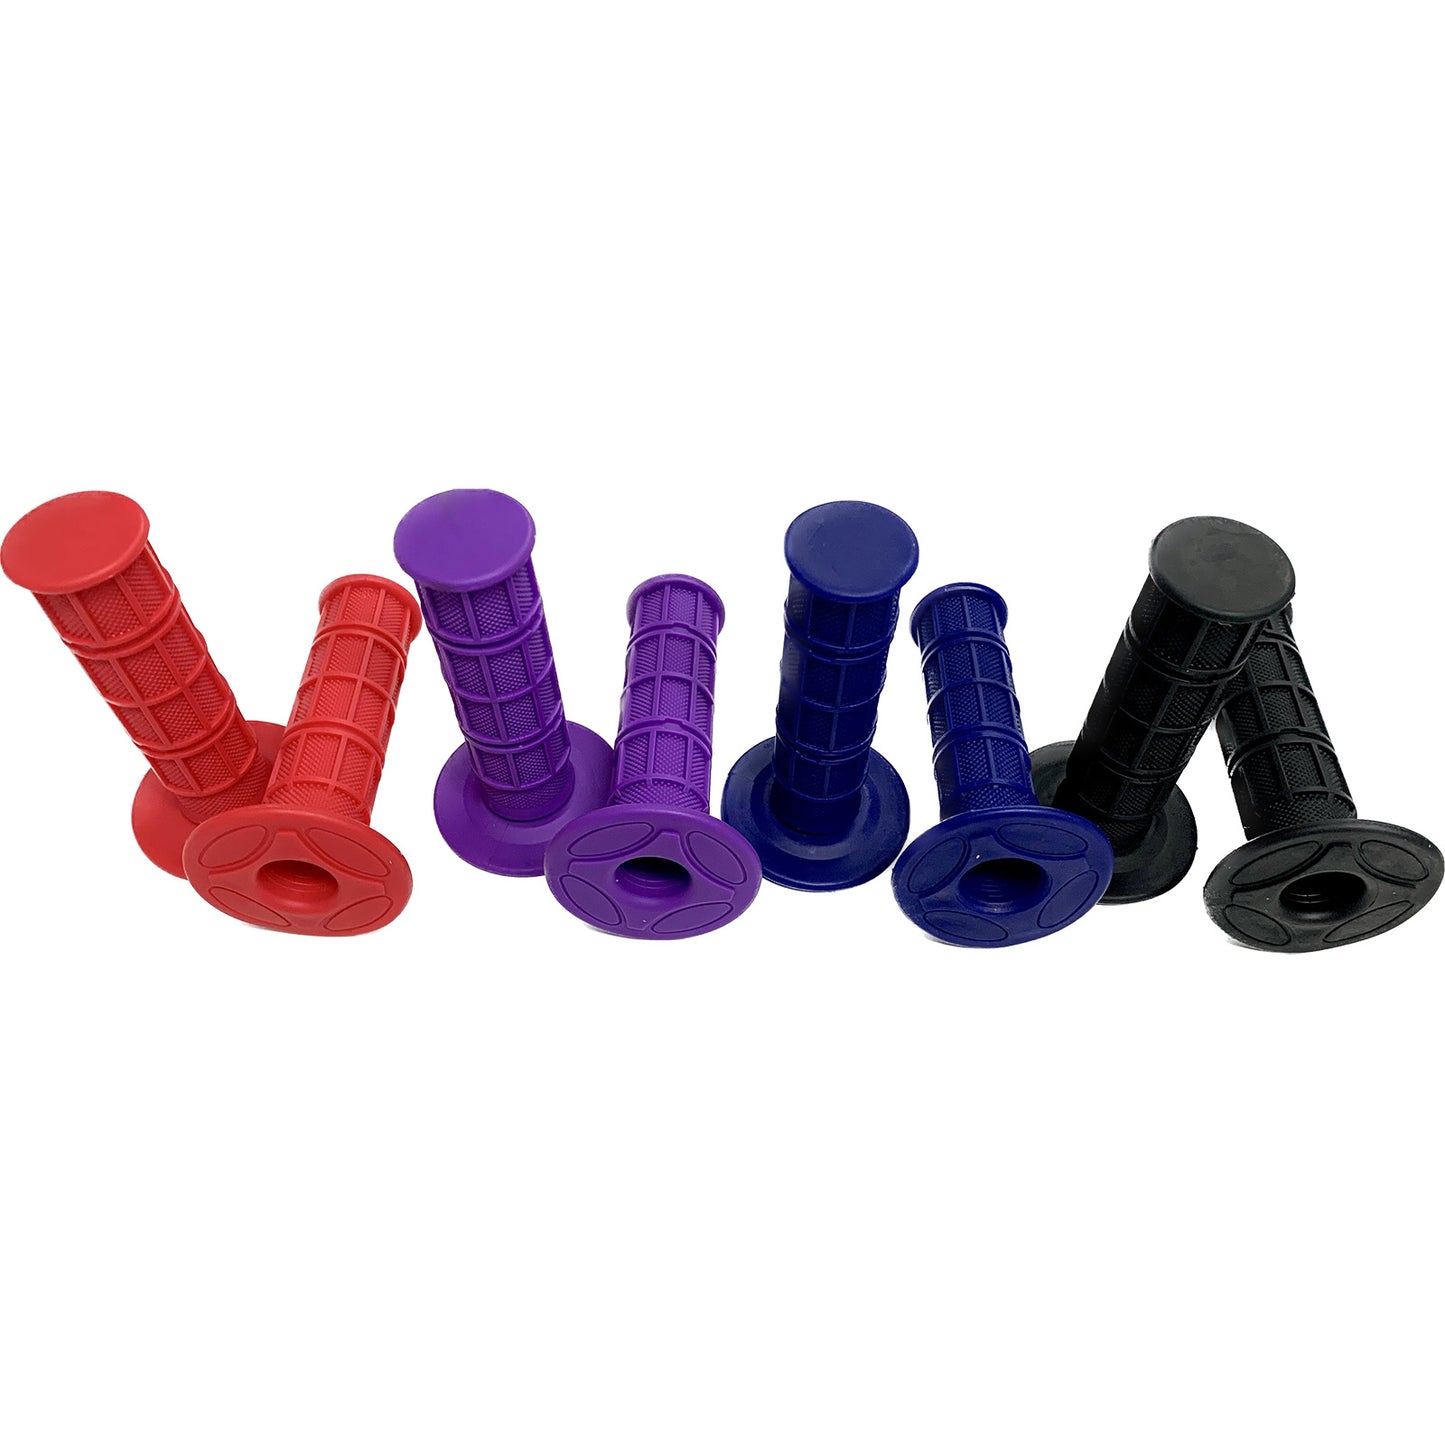 Motorcycle Hand grips 7/8" 22mm For Atomik Pitpro 50/90/110/125/150/200/250 cc